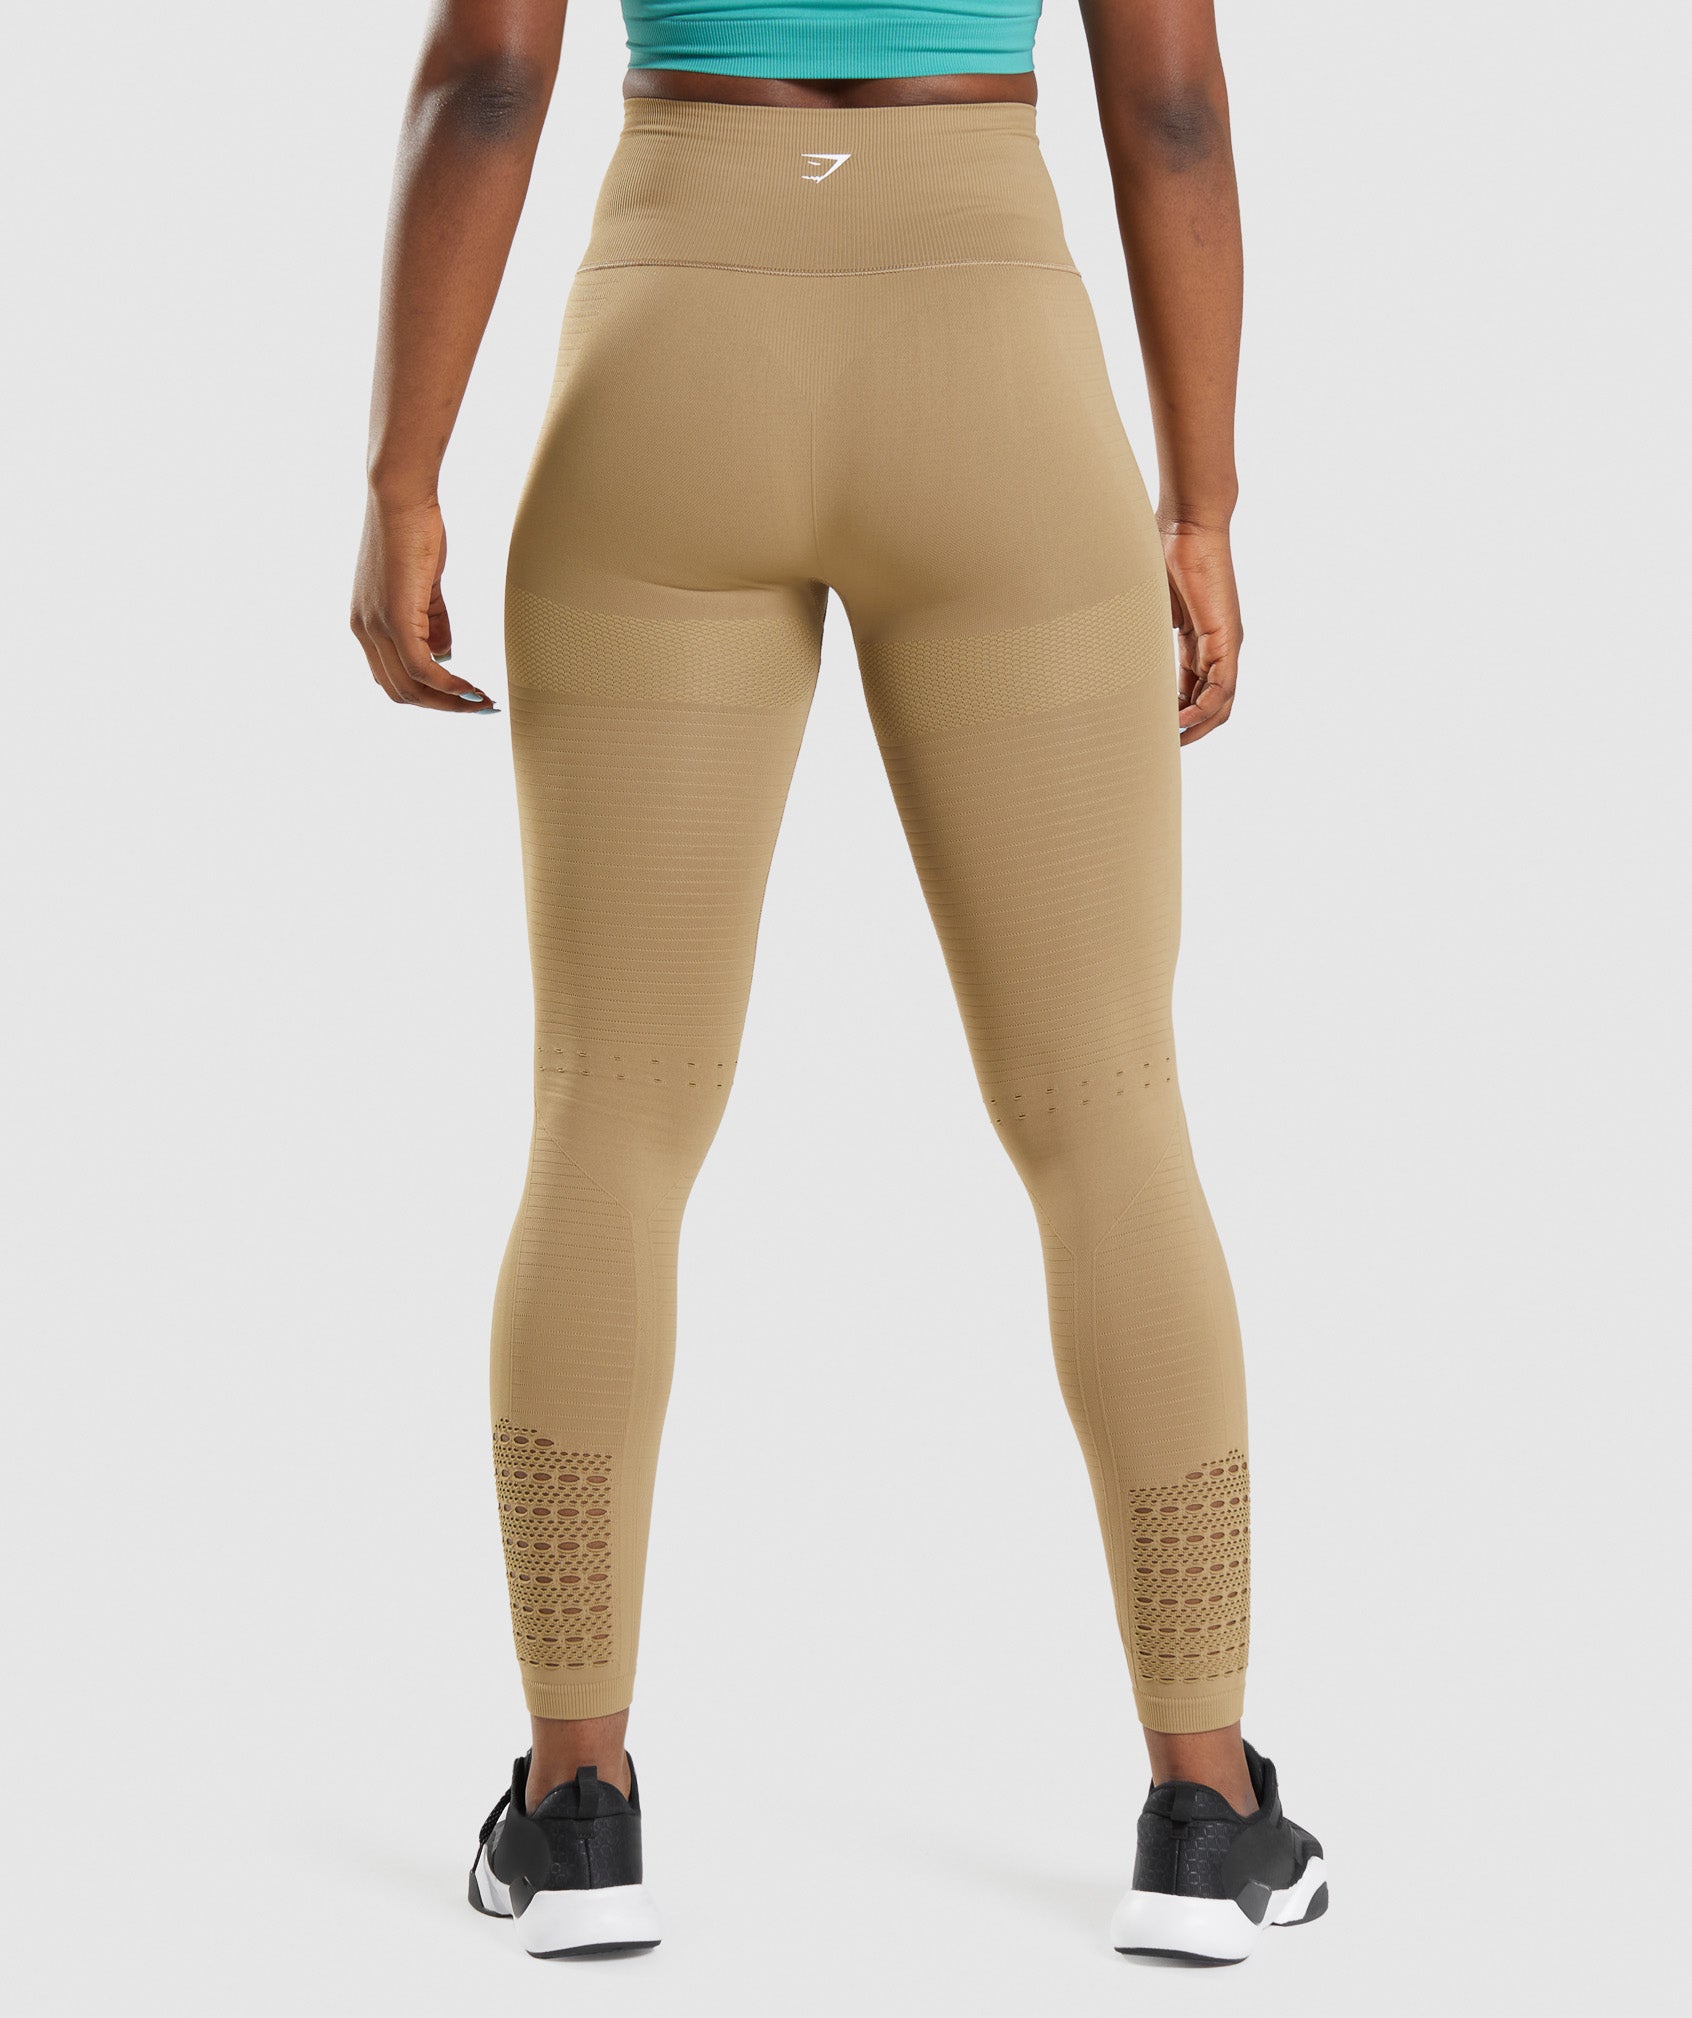 Energy Seamless Leggings in Biscotti Brown - view 2